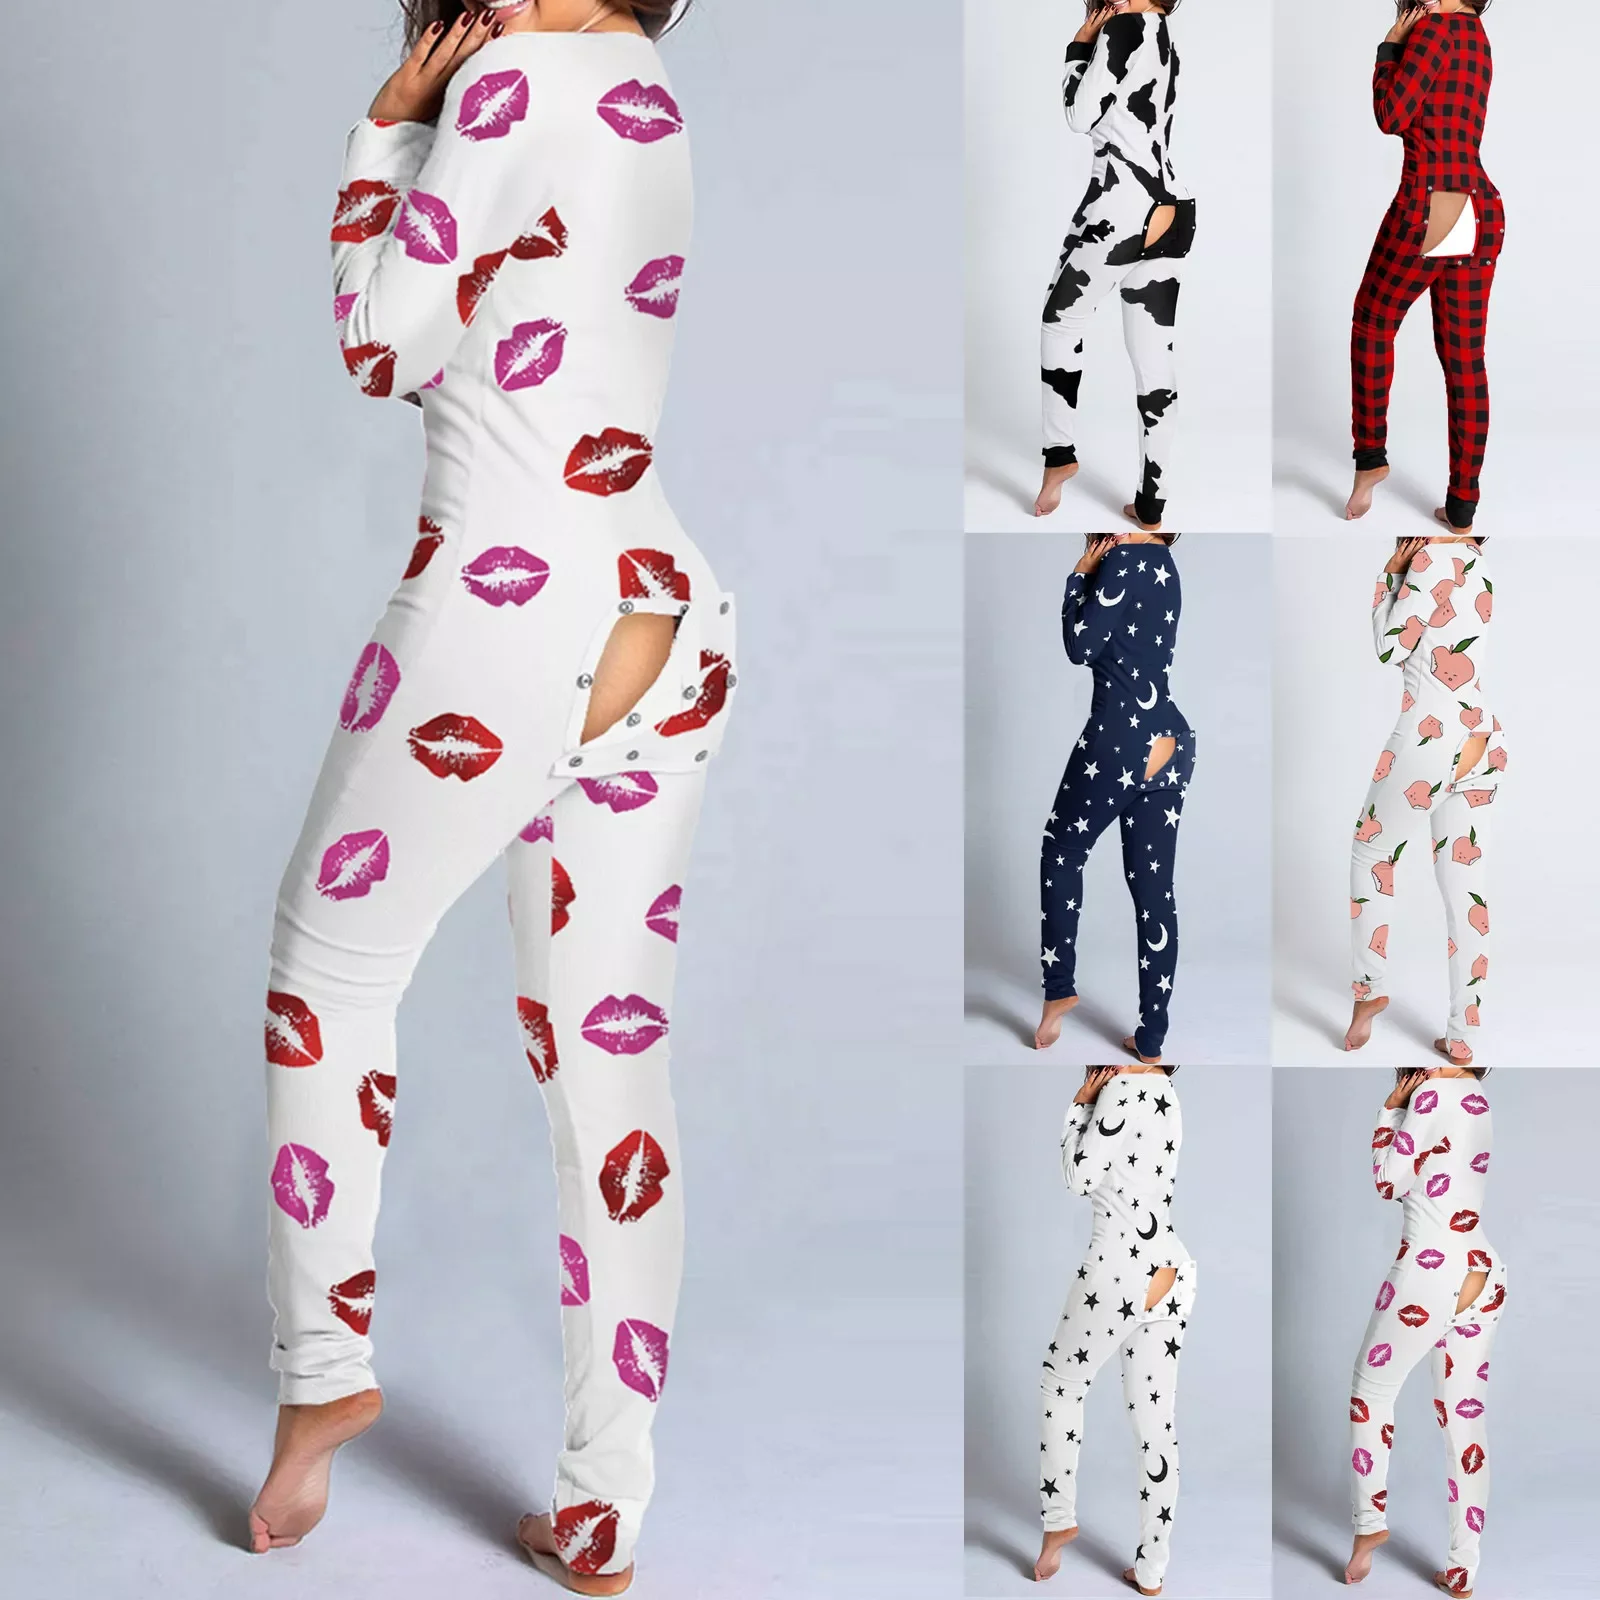 New in Pijamas Women Cutout Functional Buttoned Flap Adults Pajamas Casual Long Sleeve V-Neck Club Jumpsuit Female Home Sleepwea